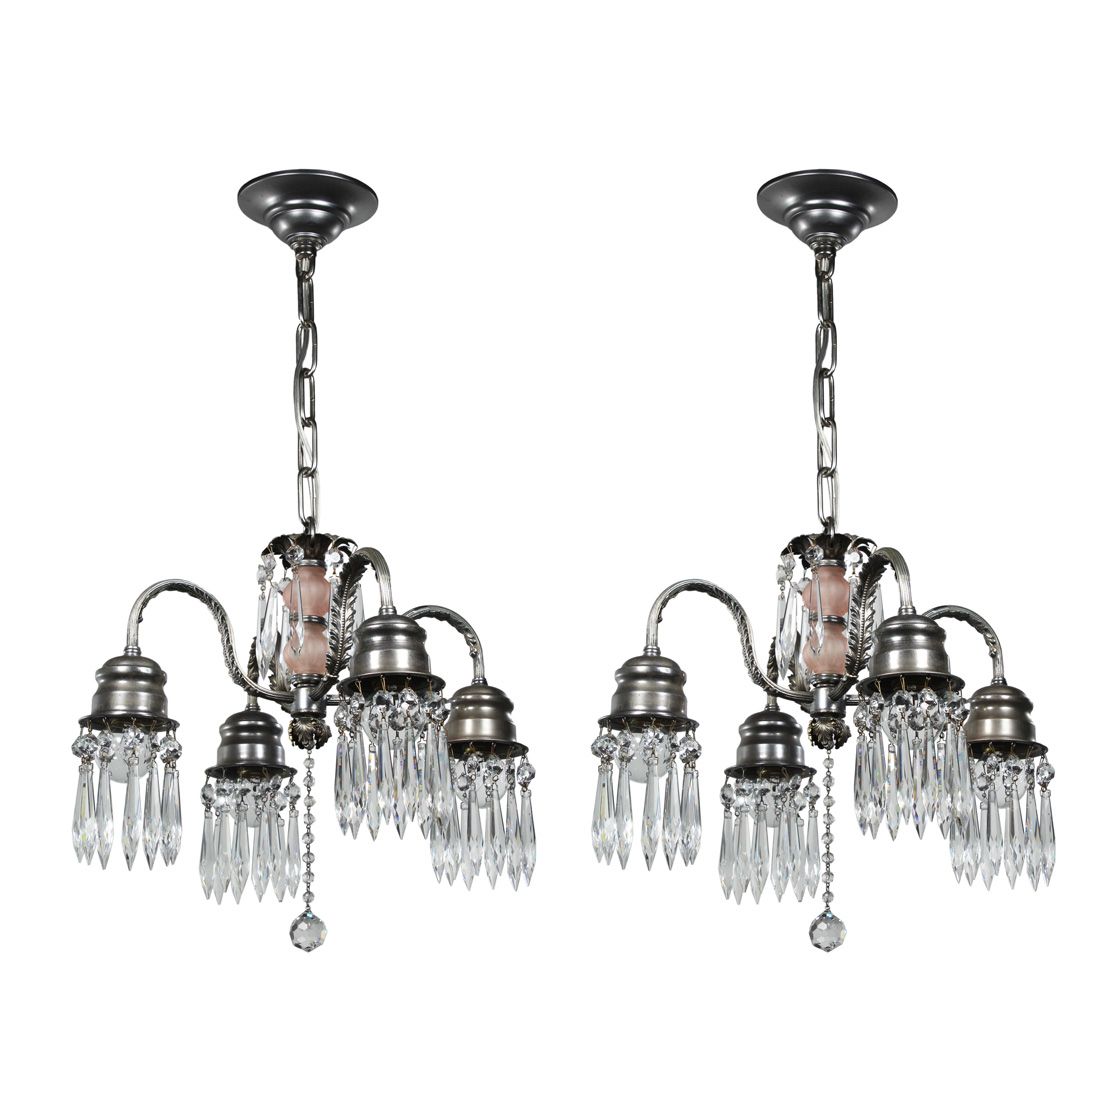 Sold Matching Antique Four Light Chandeliers With Prisms Inside Four Light Antique Silver Chandeliers (View 6 of 15)